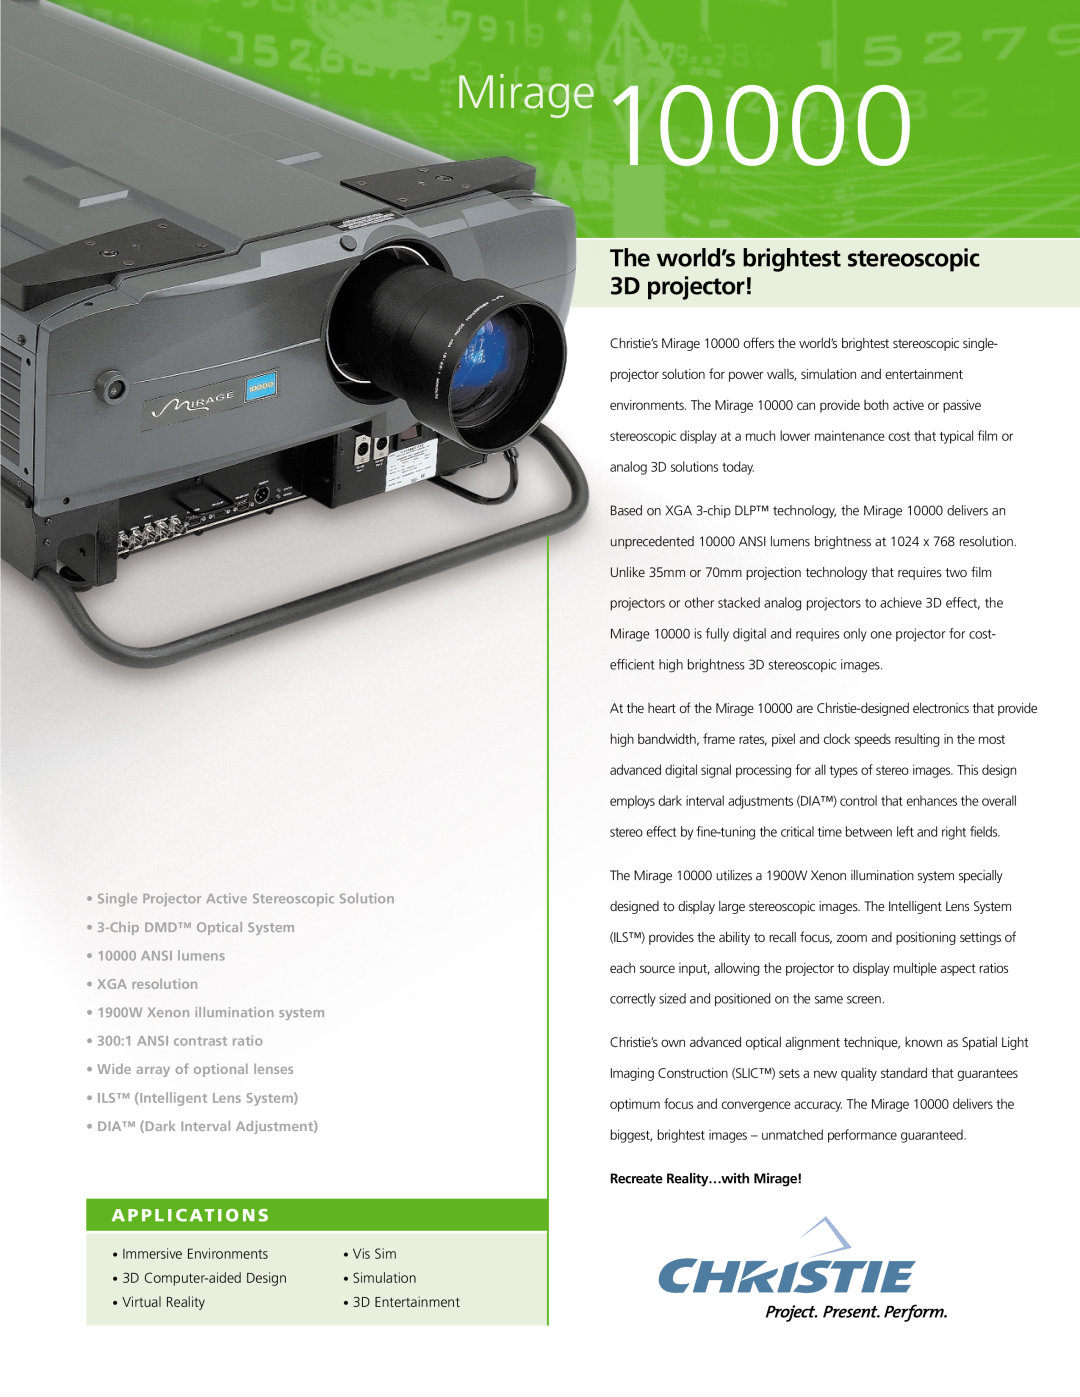 Christie Digital Systems manual A P P L I C At I O N S, Mirage10000, The world’s brightest stereoscopic 3D projector 